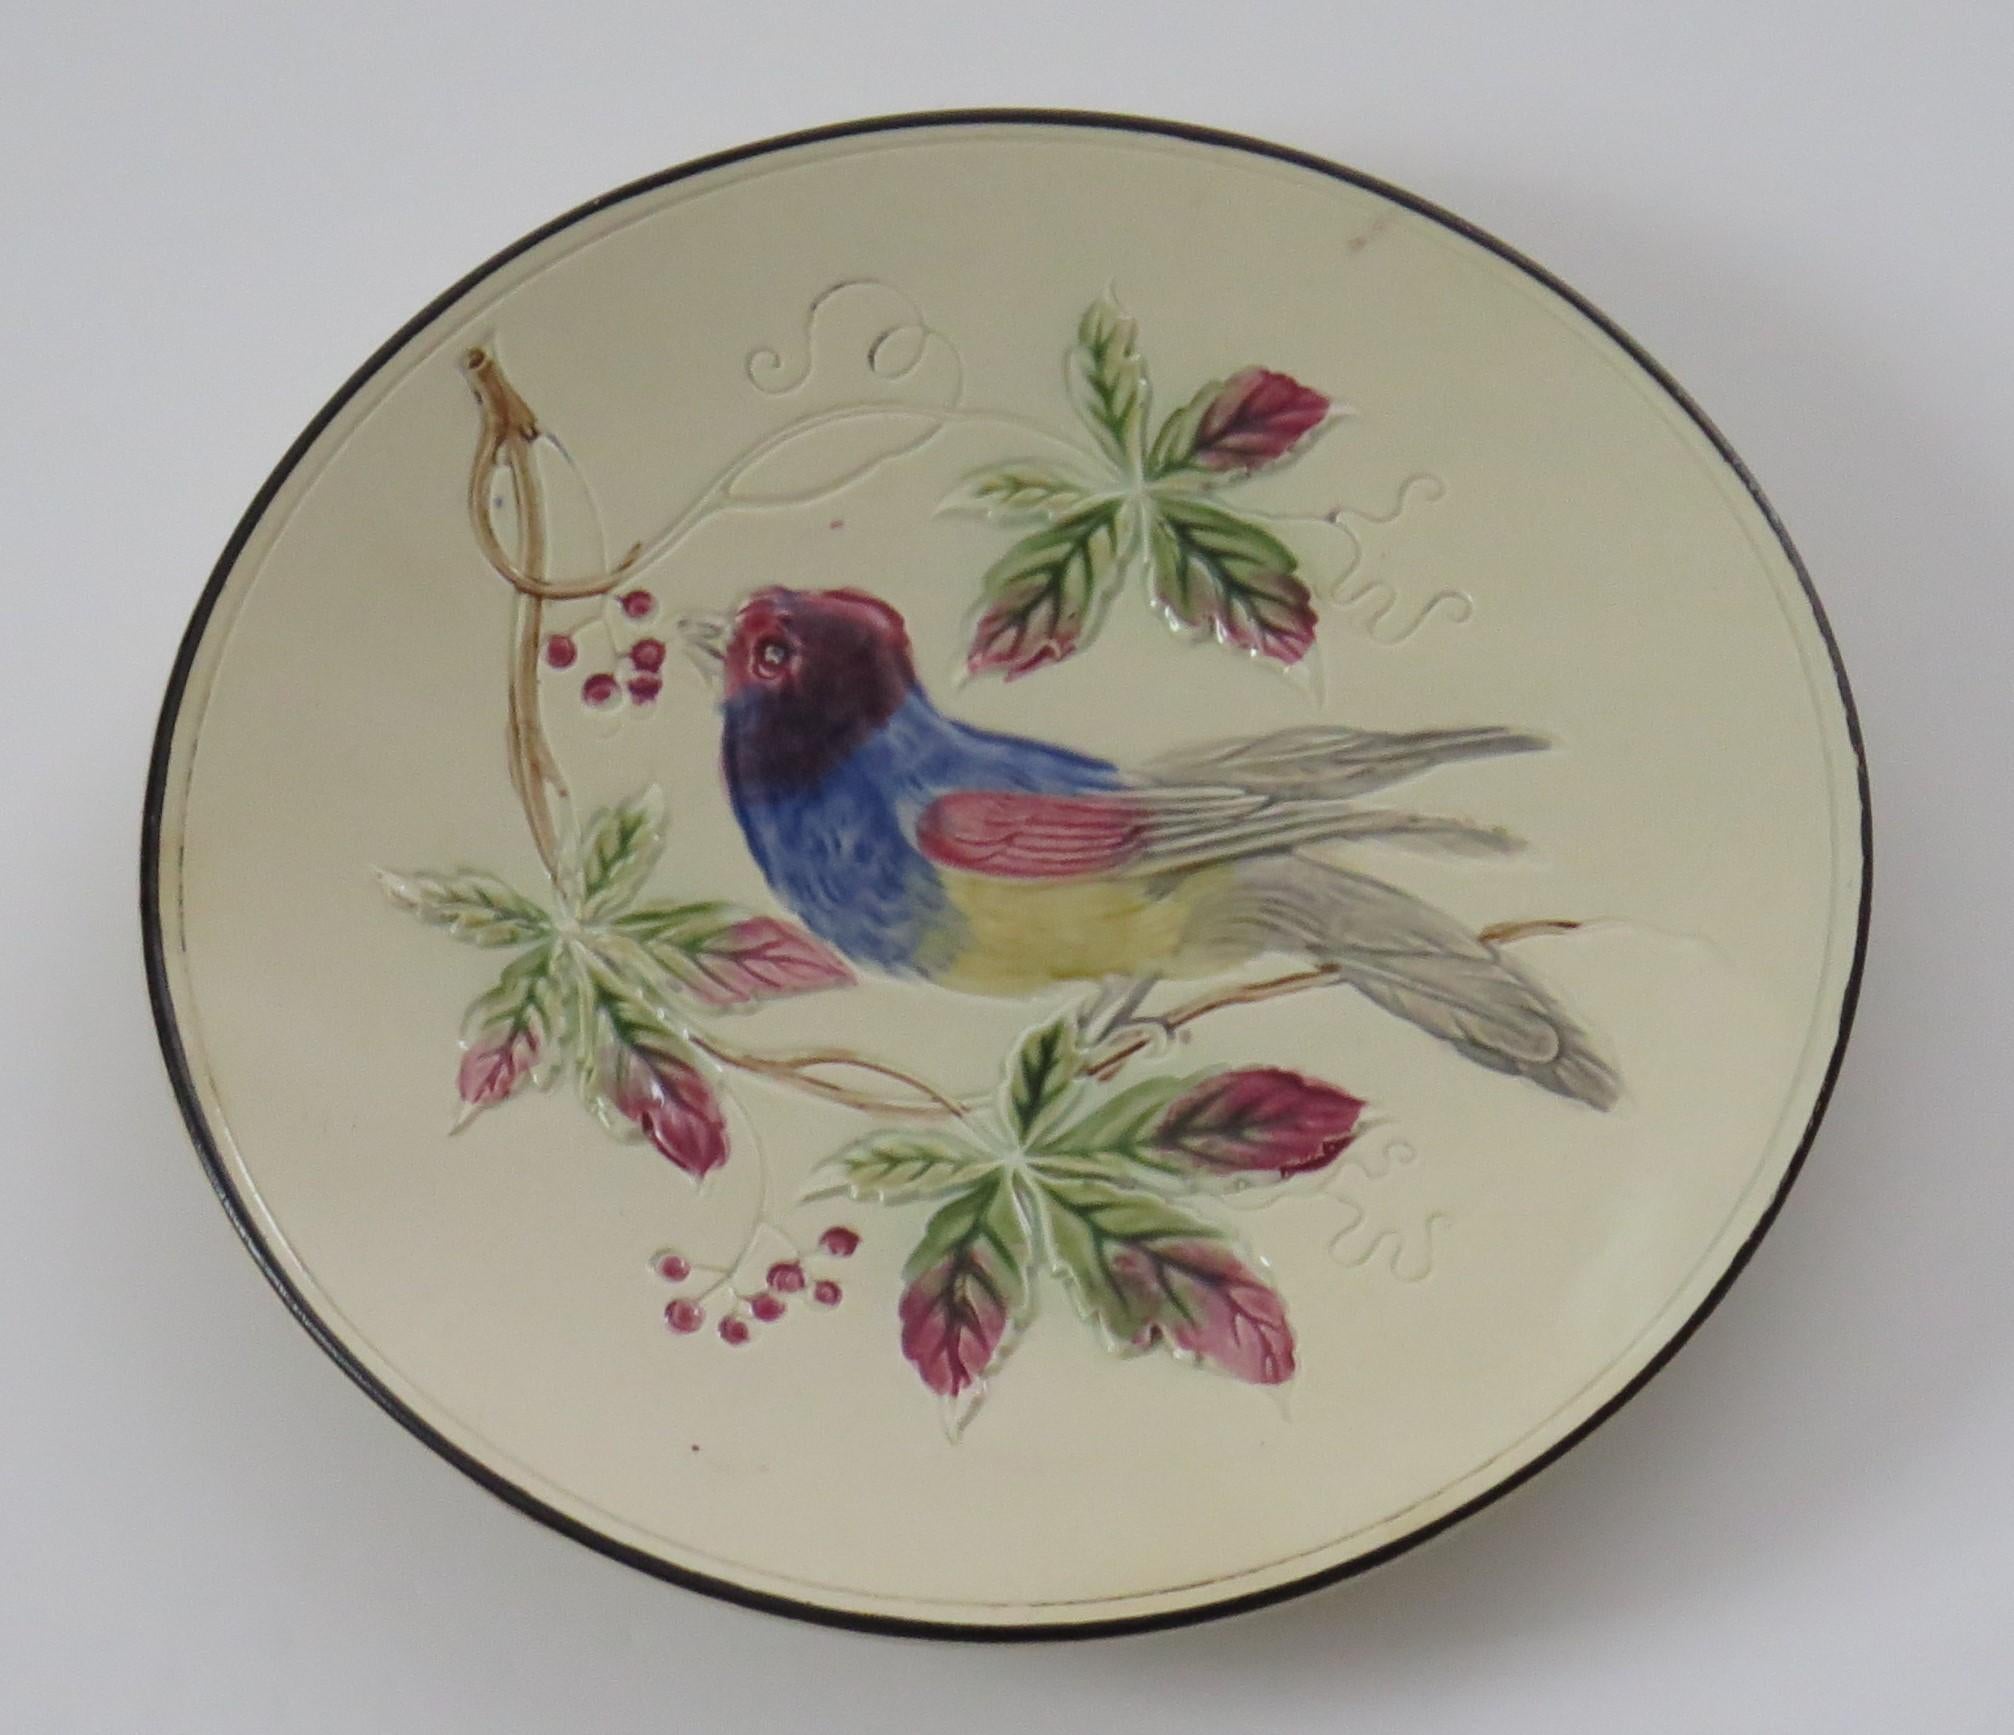 This is an early Majolica pottery Plate with a bird perched in the branches of a climbing plant. We date this plate to the early 19th Century, probably French.

The plate is hand potted on a low foot with an incised edge to the rim and a soft